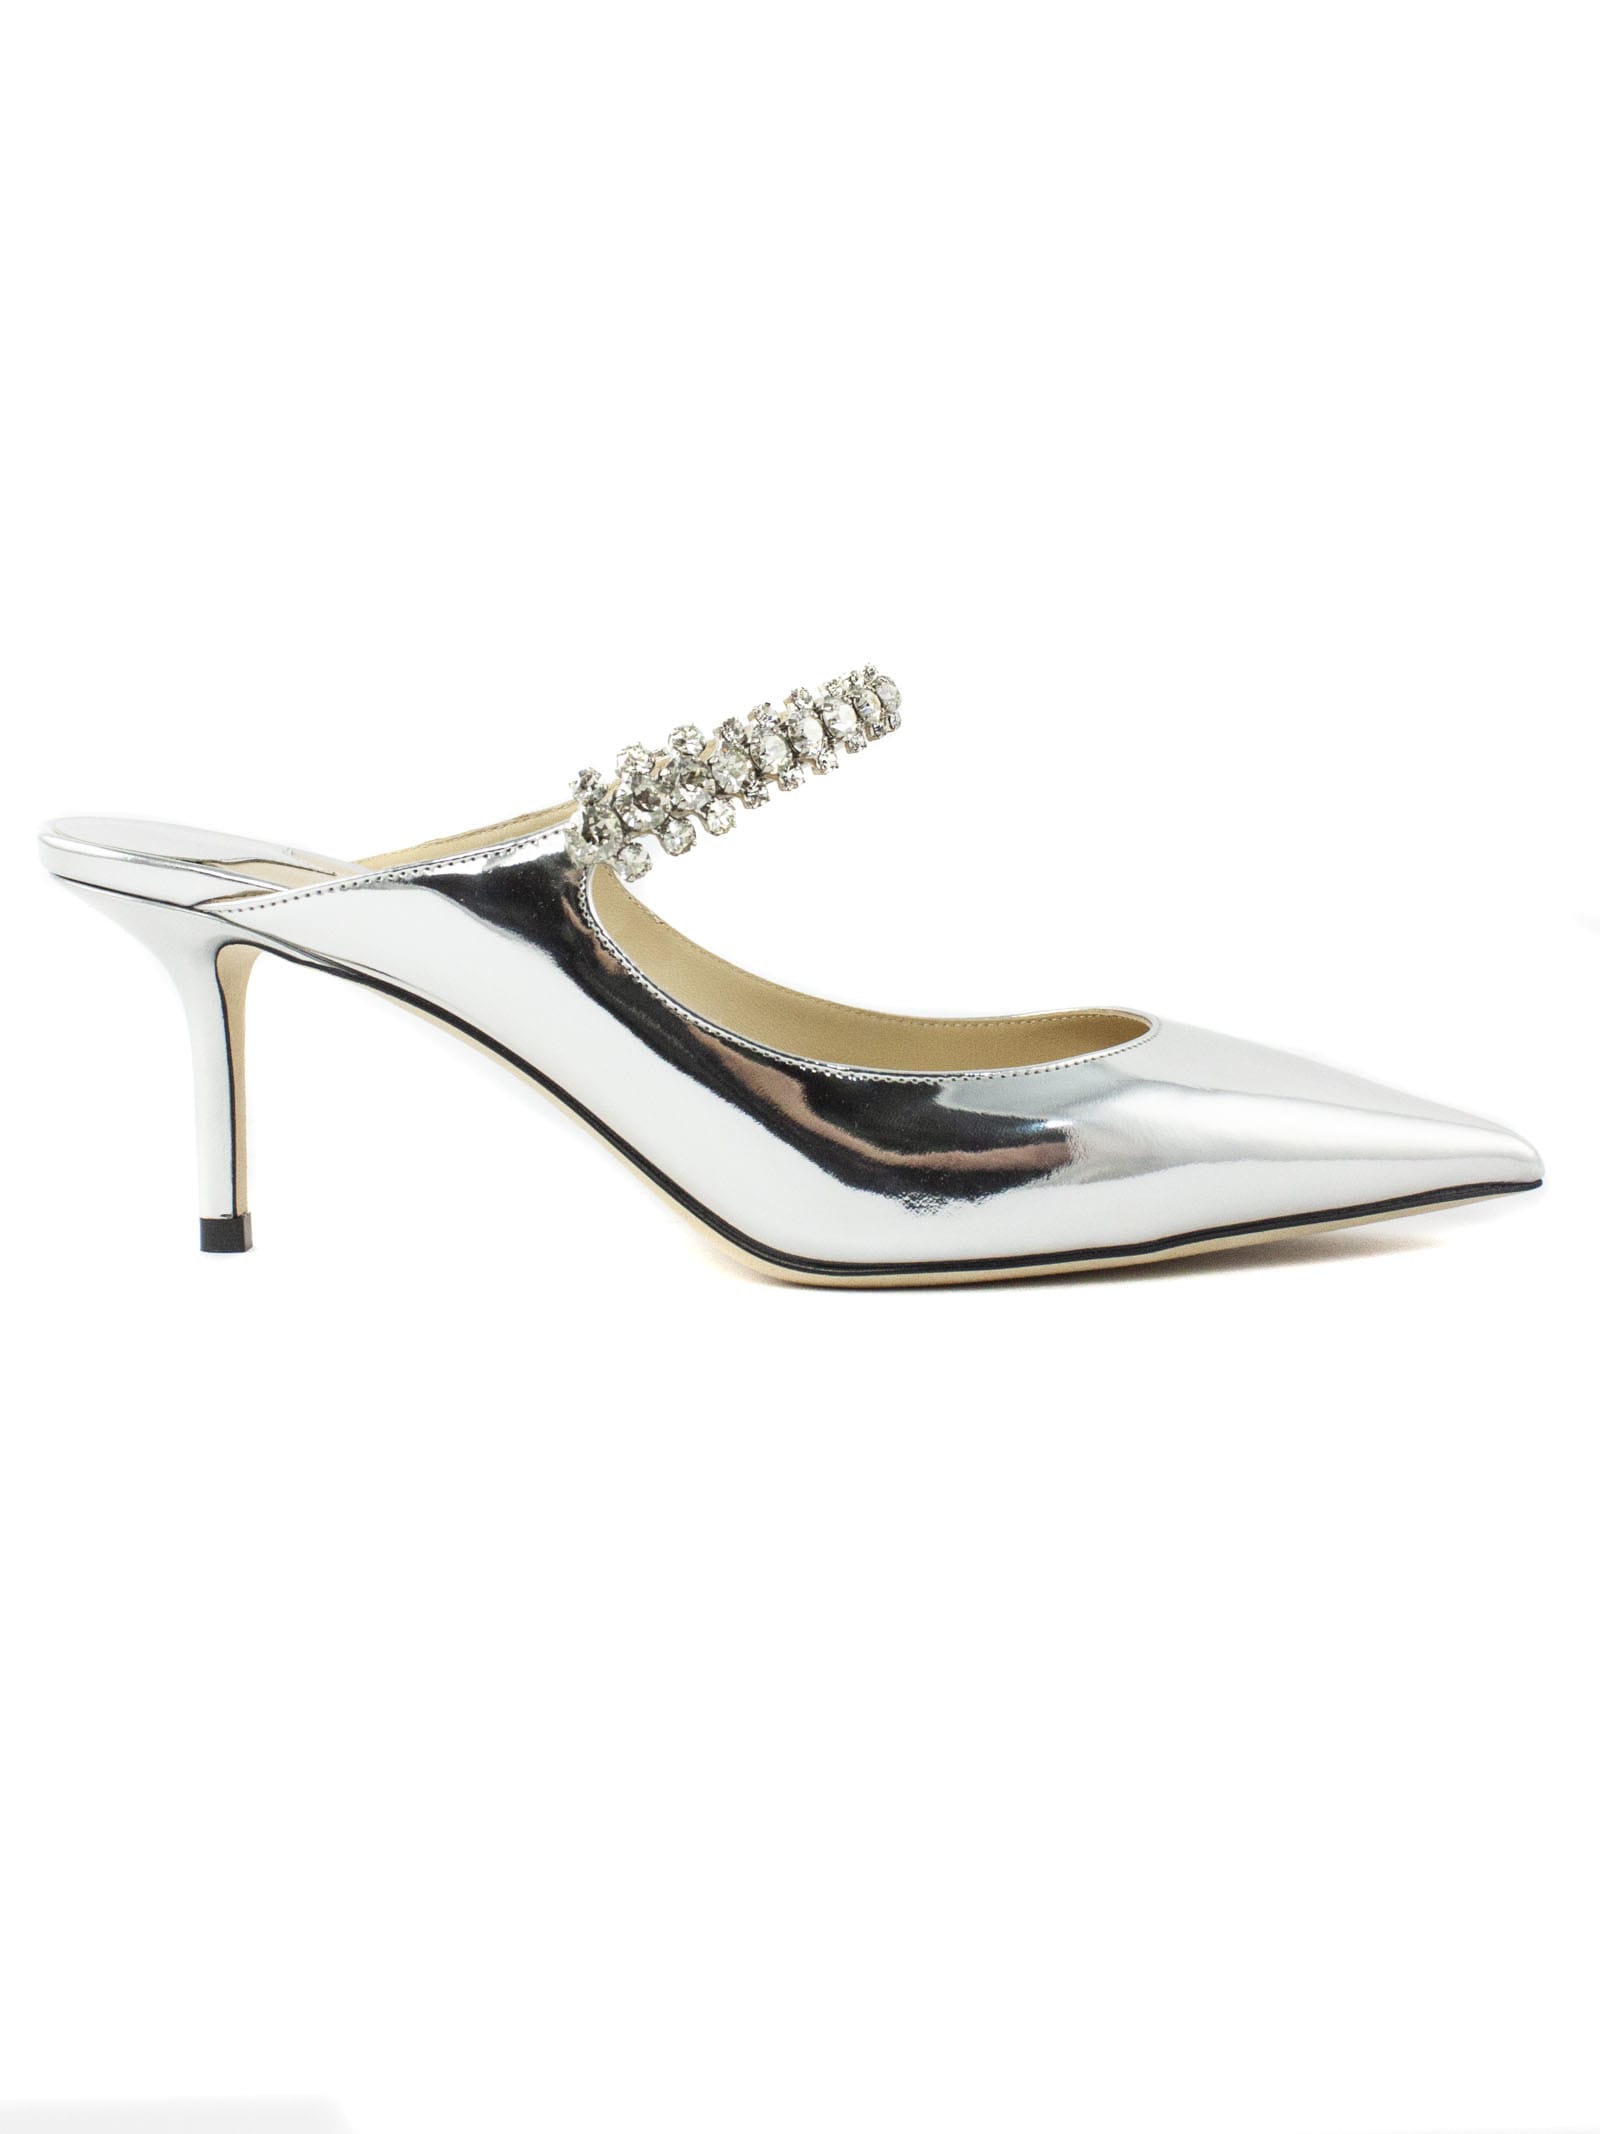 Jimmy Choo Silver Patent Leather Mule